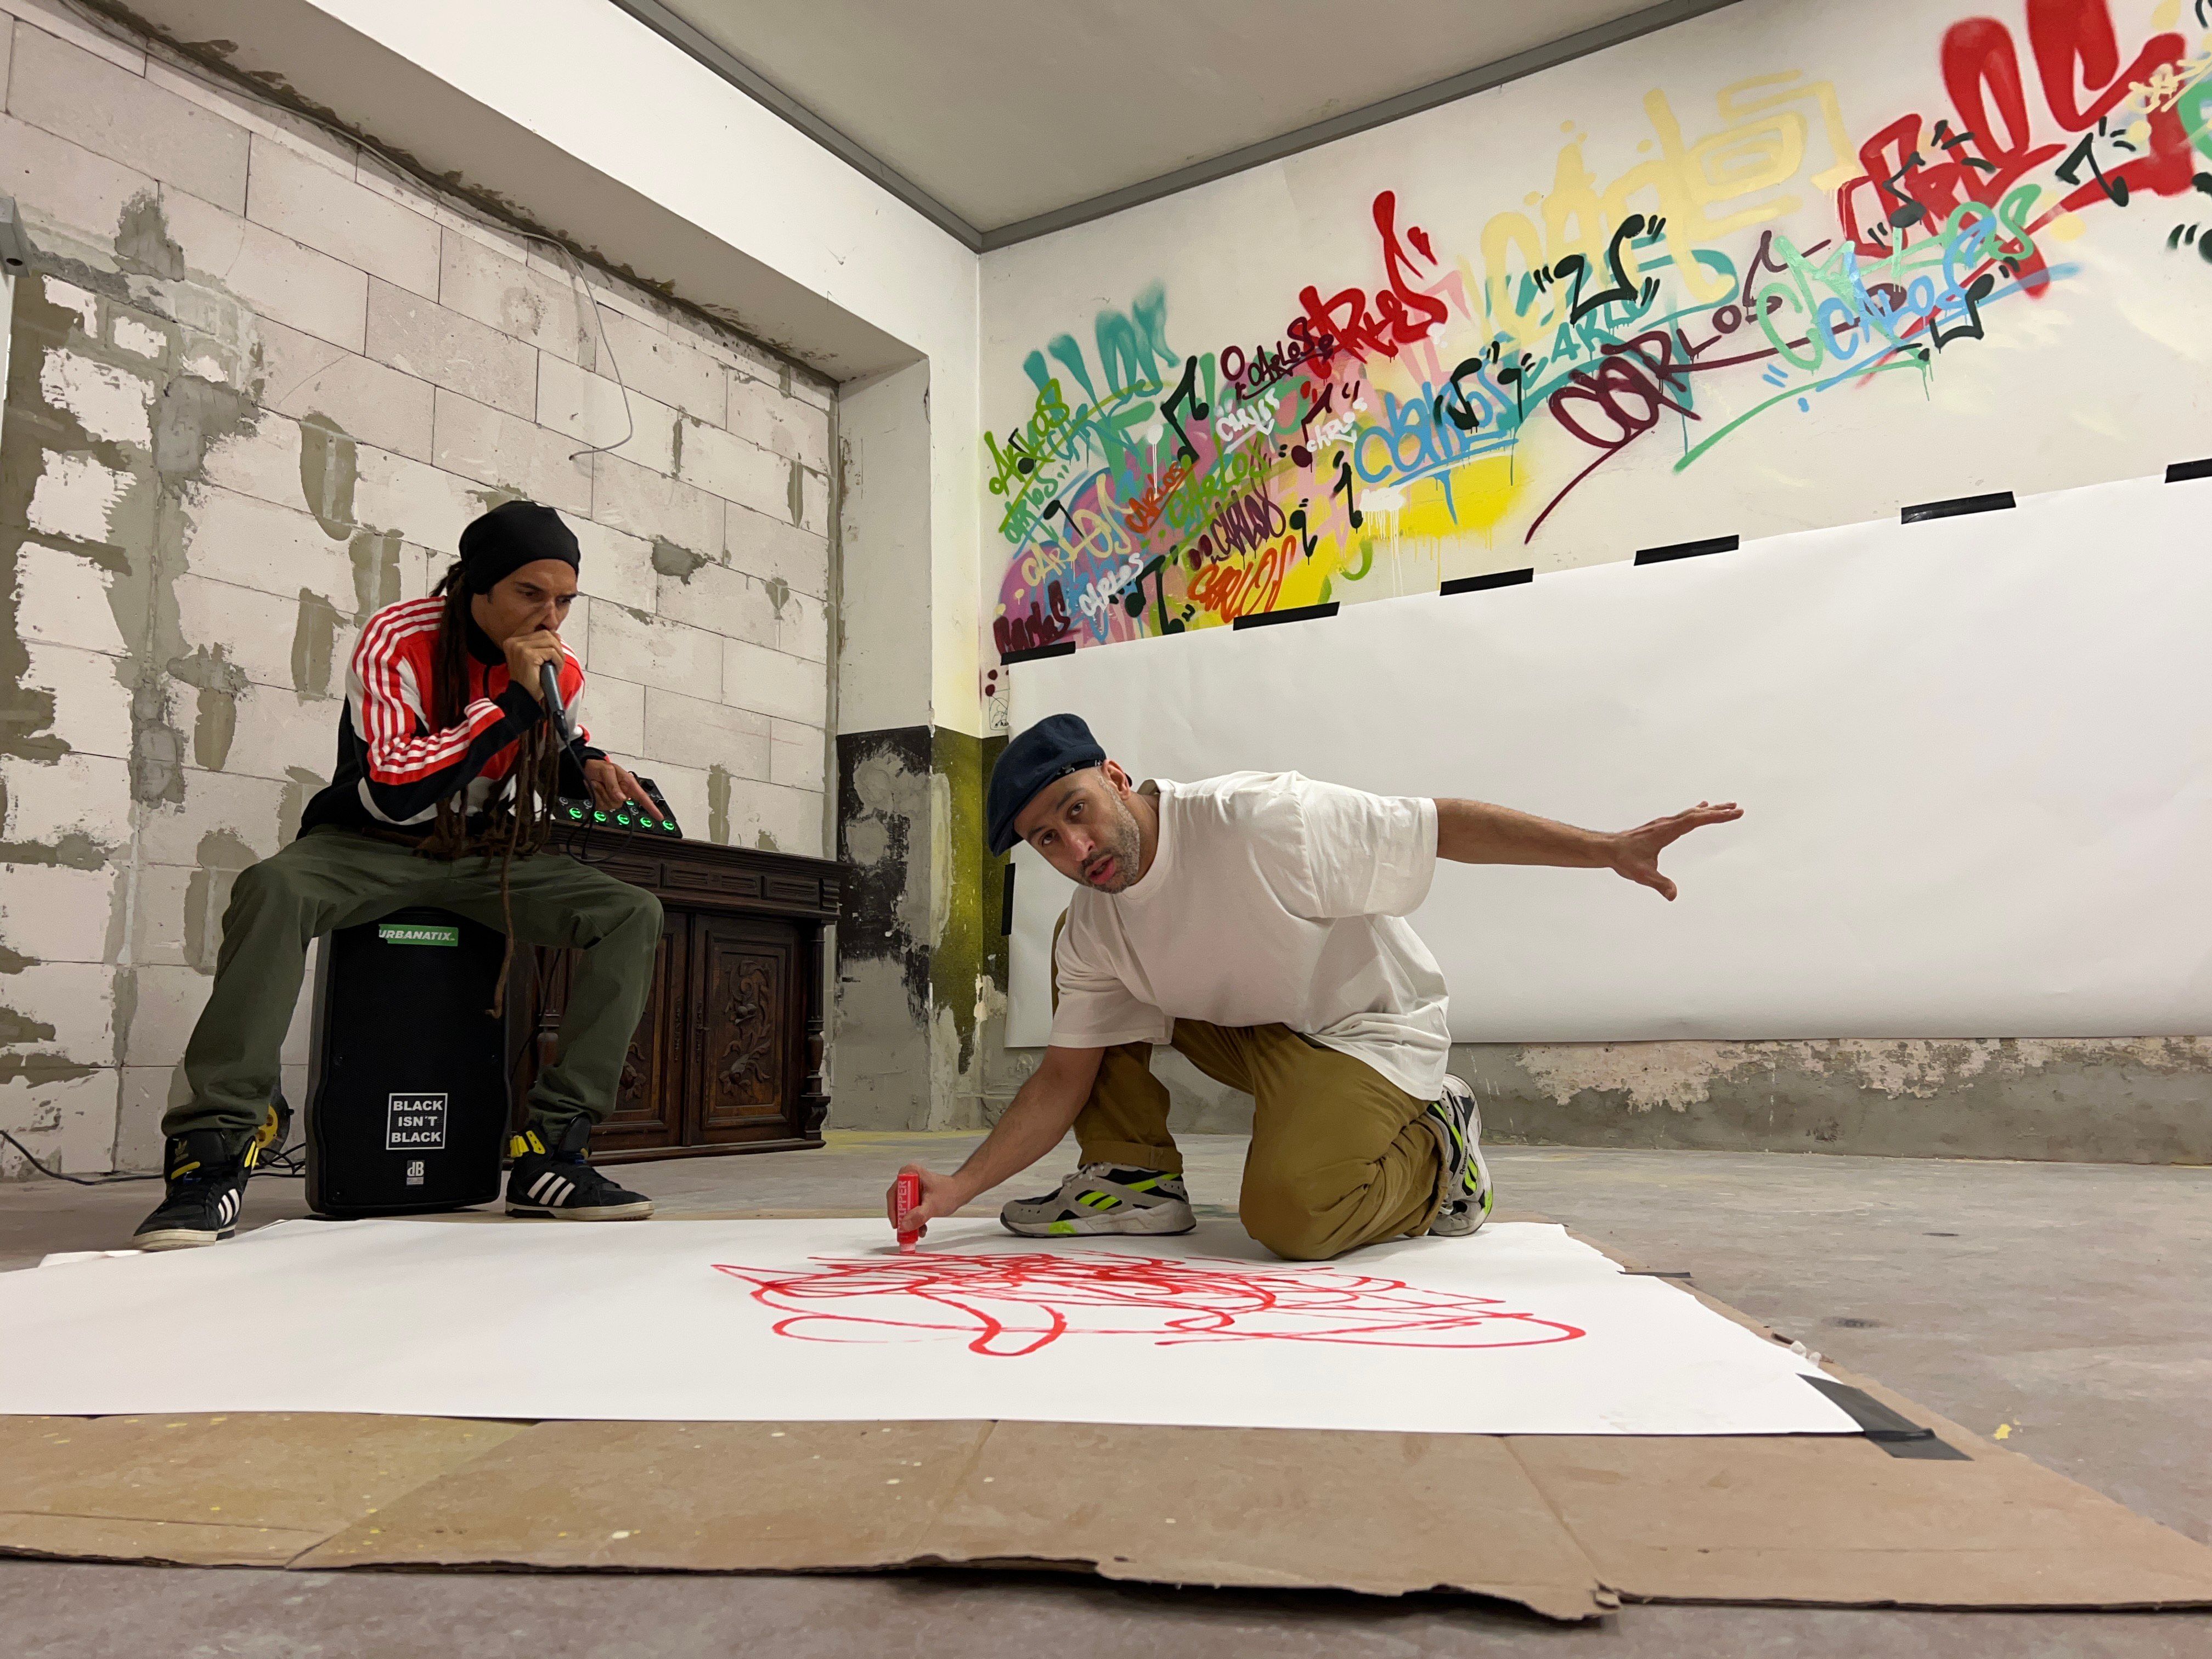 Two people can be seen in the photo. One person is sitting on a jukebox and speaking into a microphone. The other person is kneeling on the floor and drawing something on paper with a red marker and  is looking into the camera.